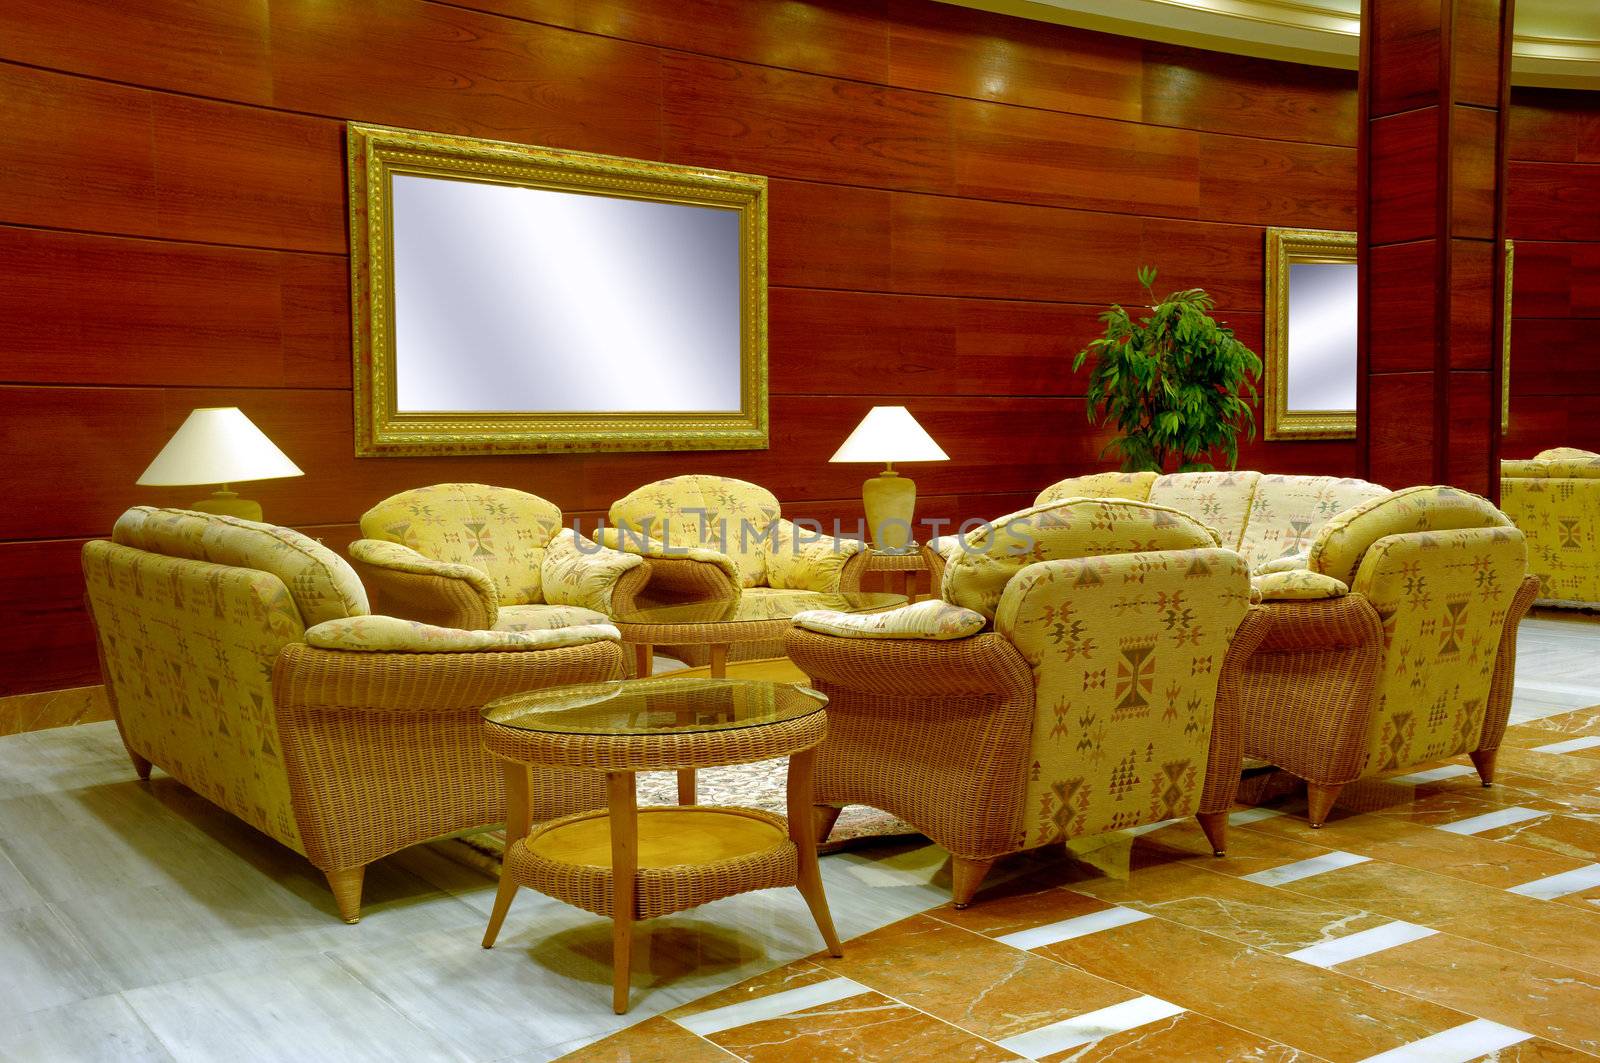 Hotel lobby whit table, chairs and sofas